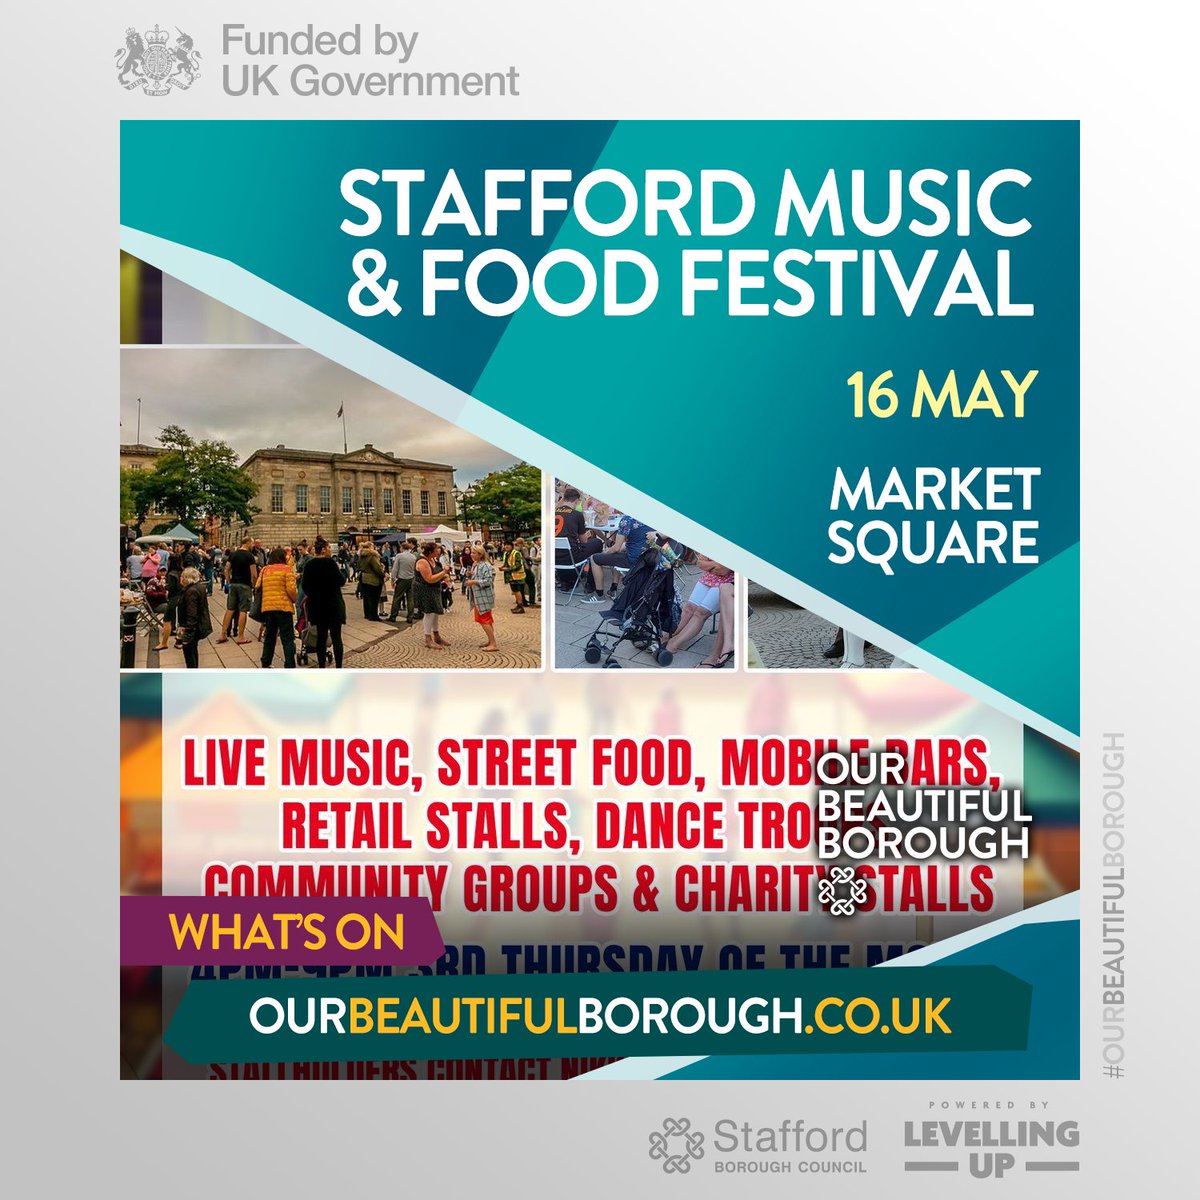 Stafford Music & Food Festival – aka @StaffordWalking Street – takes place on Thurs 16 May in #Stafford's Market Square. An event for all the community with late night shopping, live music and more: tinyurl.com/28n9psu9 #DaysOut #NightsOut #FamilyFun #OurBeautifulBorough